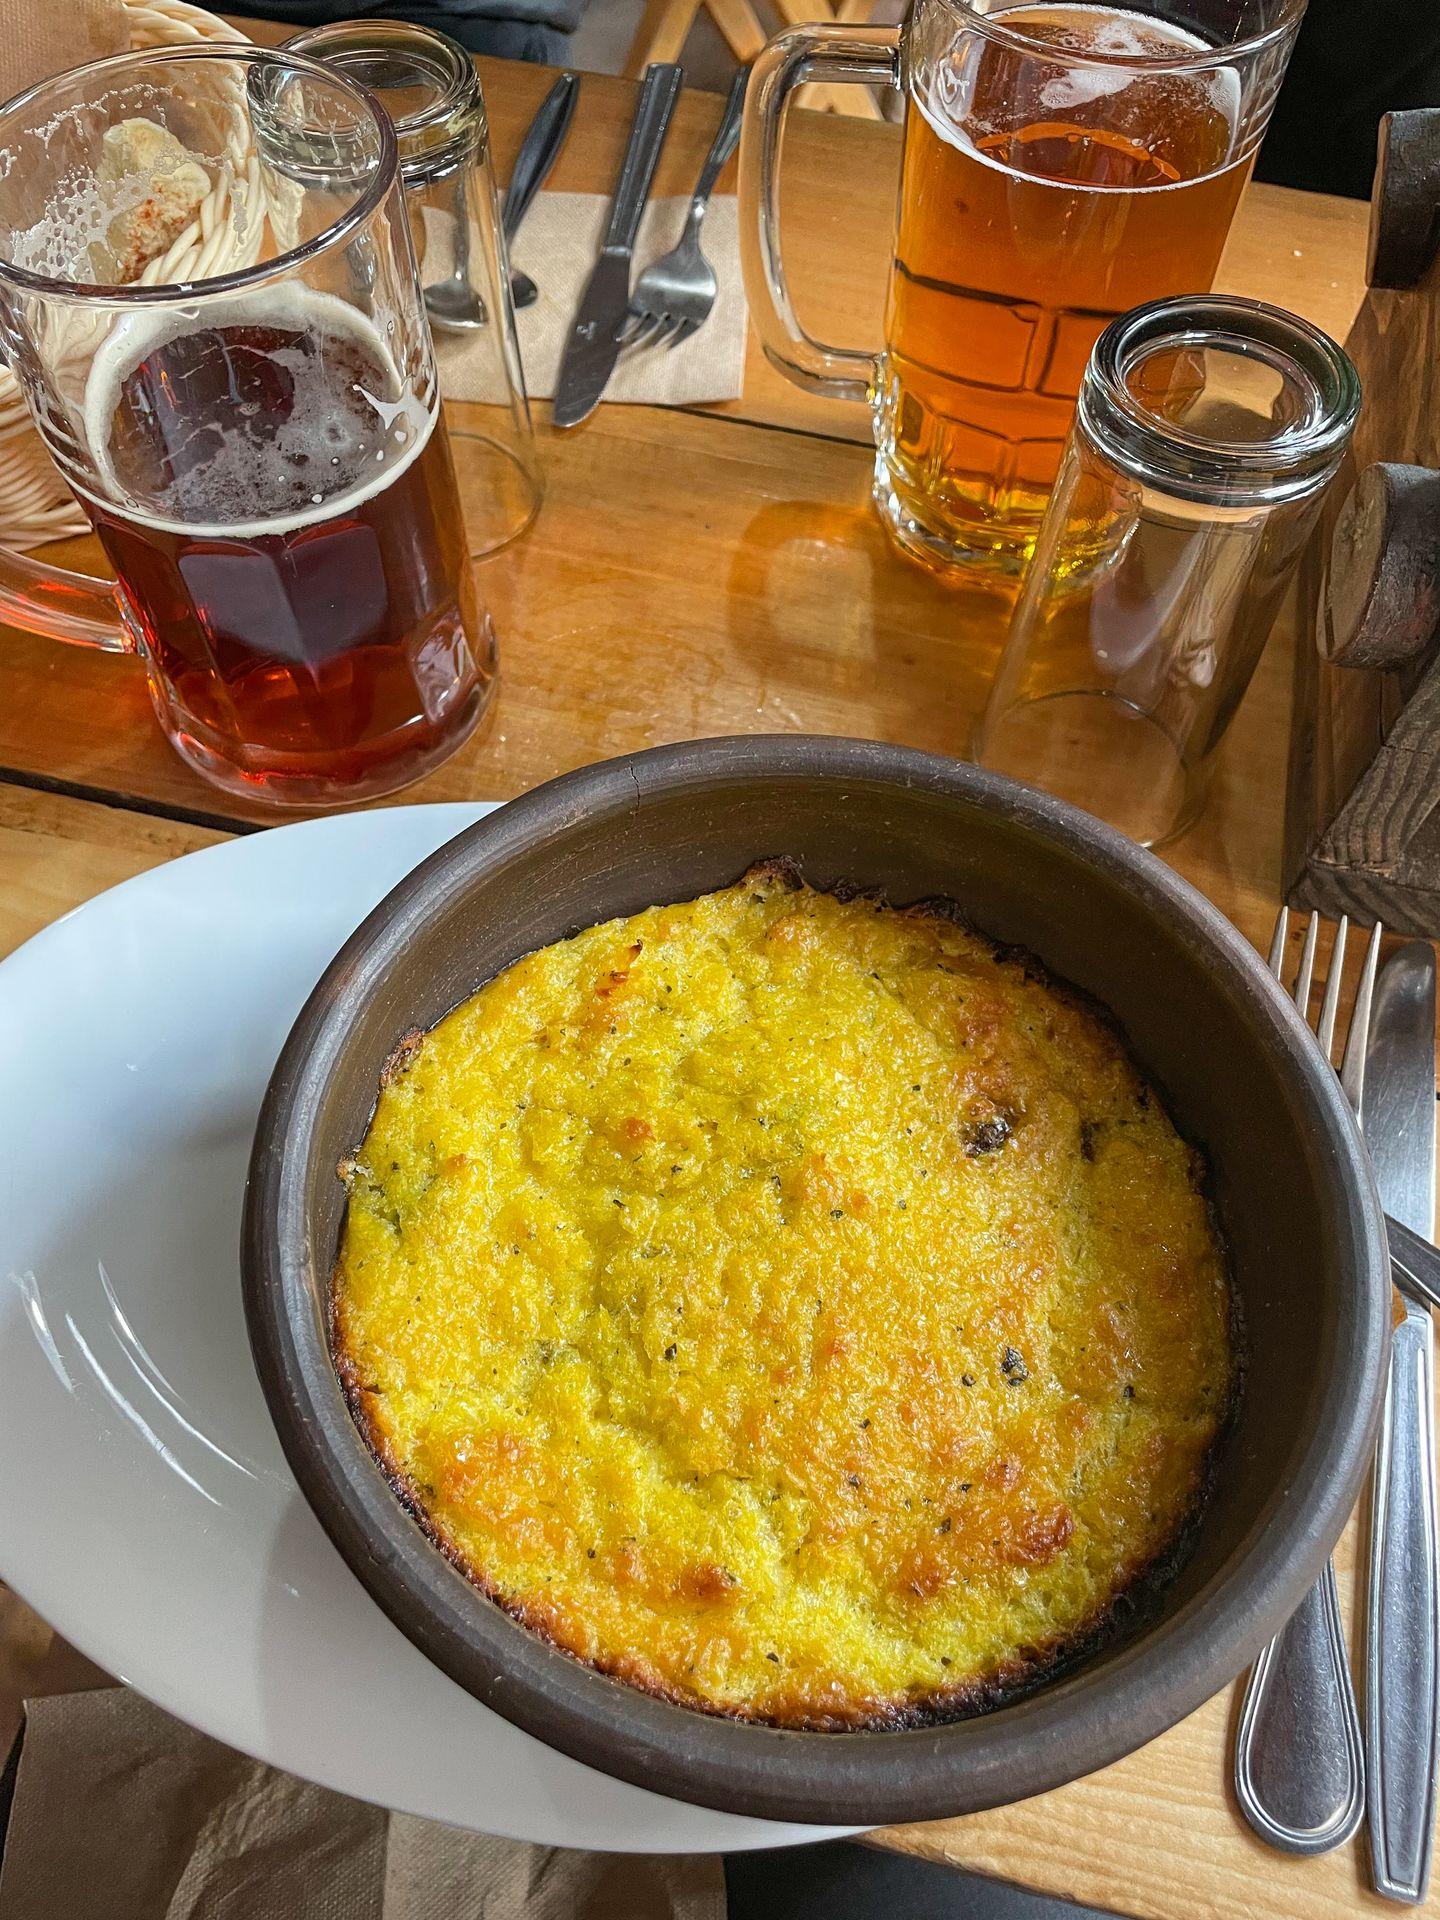 A bowl of a cornbread dish served for dinner at El Chileno. Large glasses of beer also sit on the table.